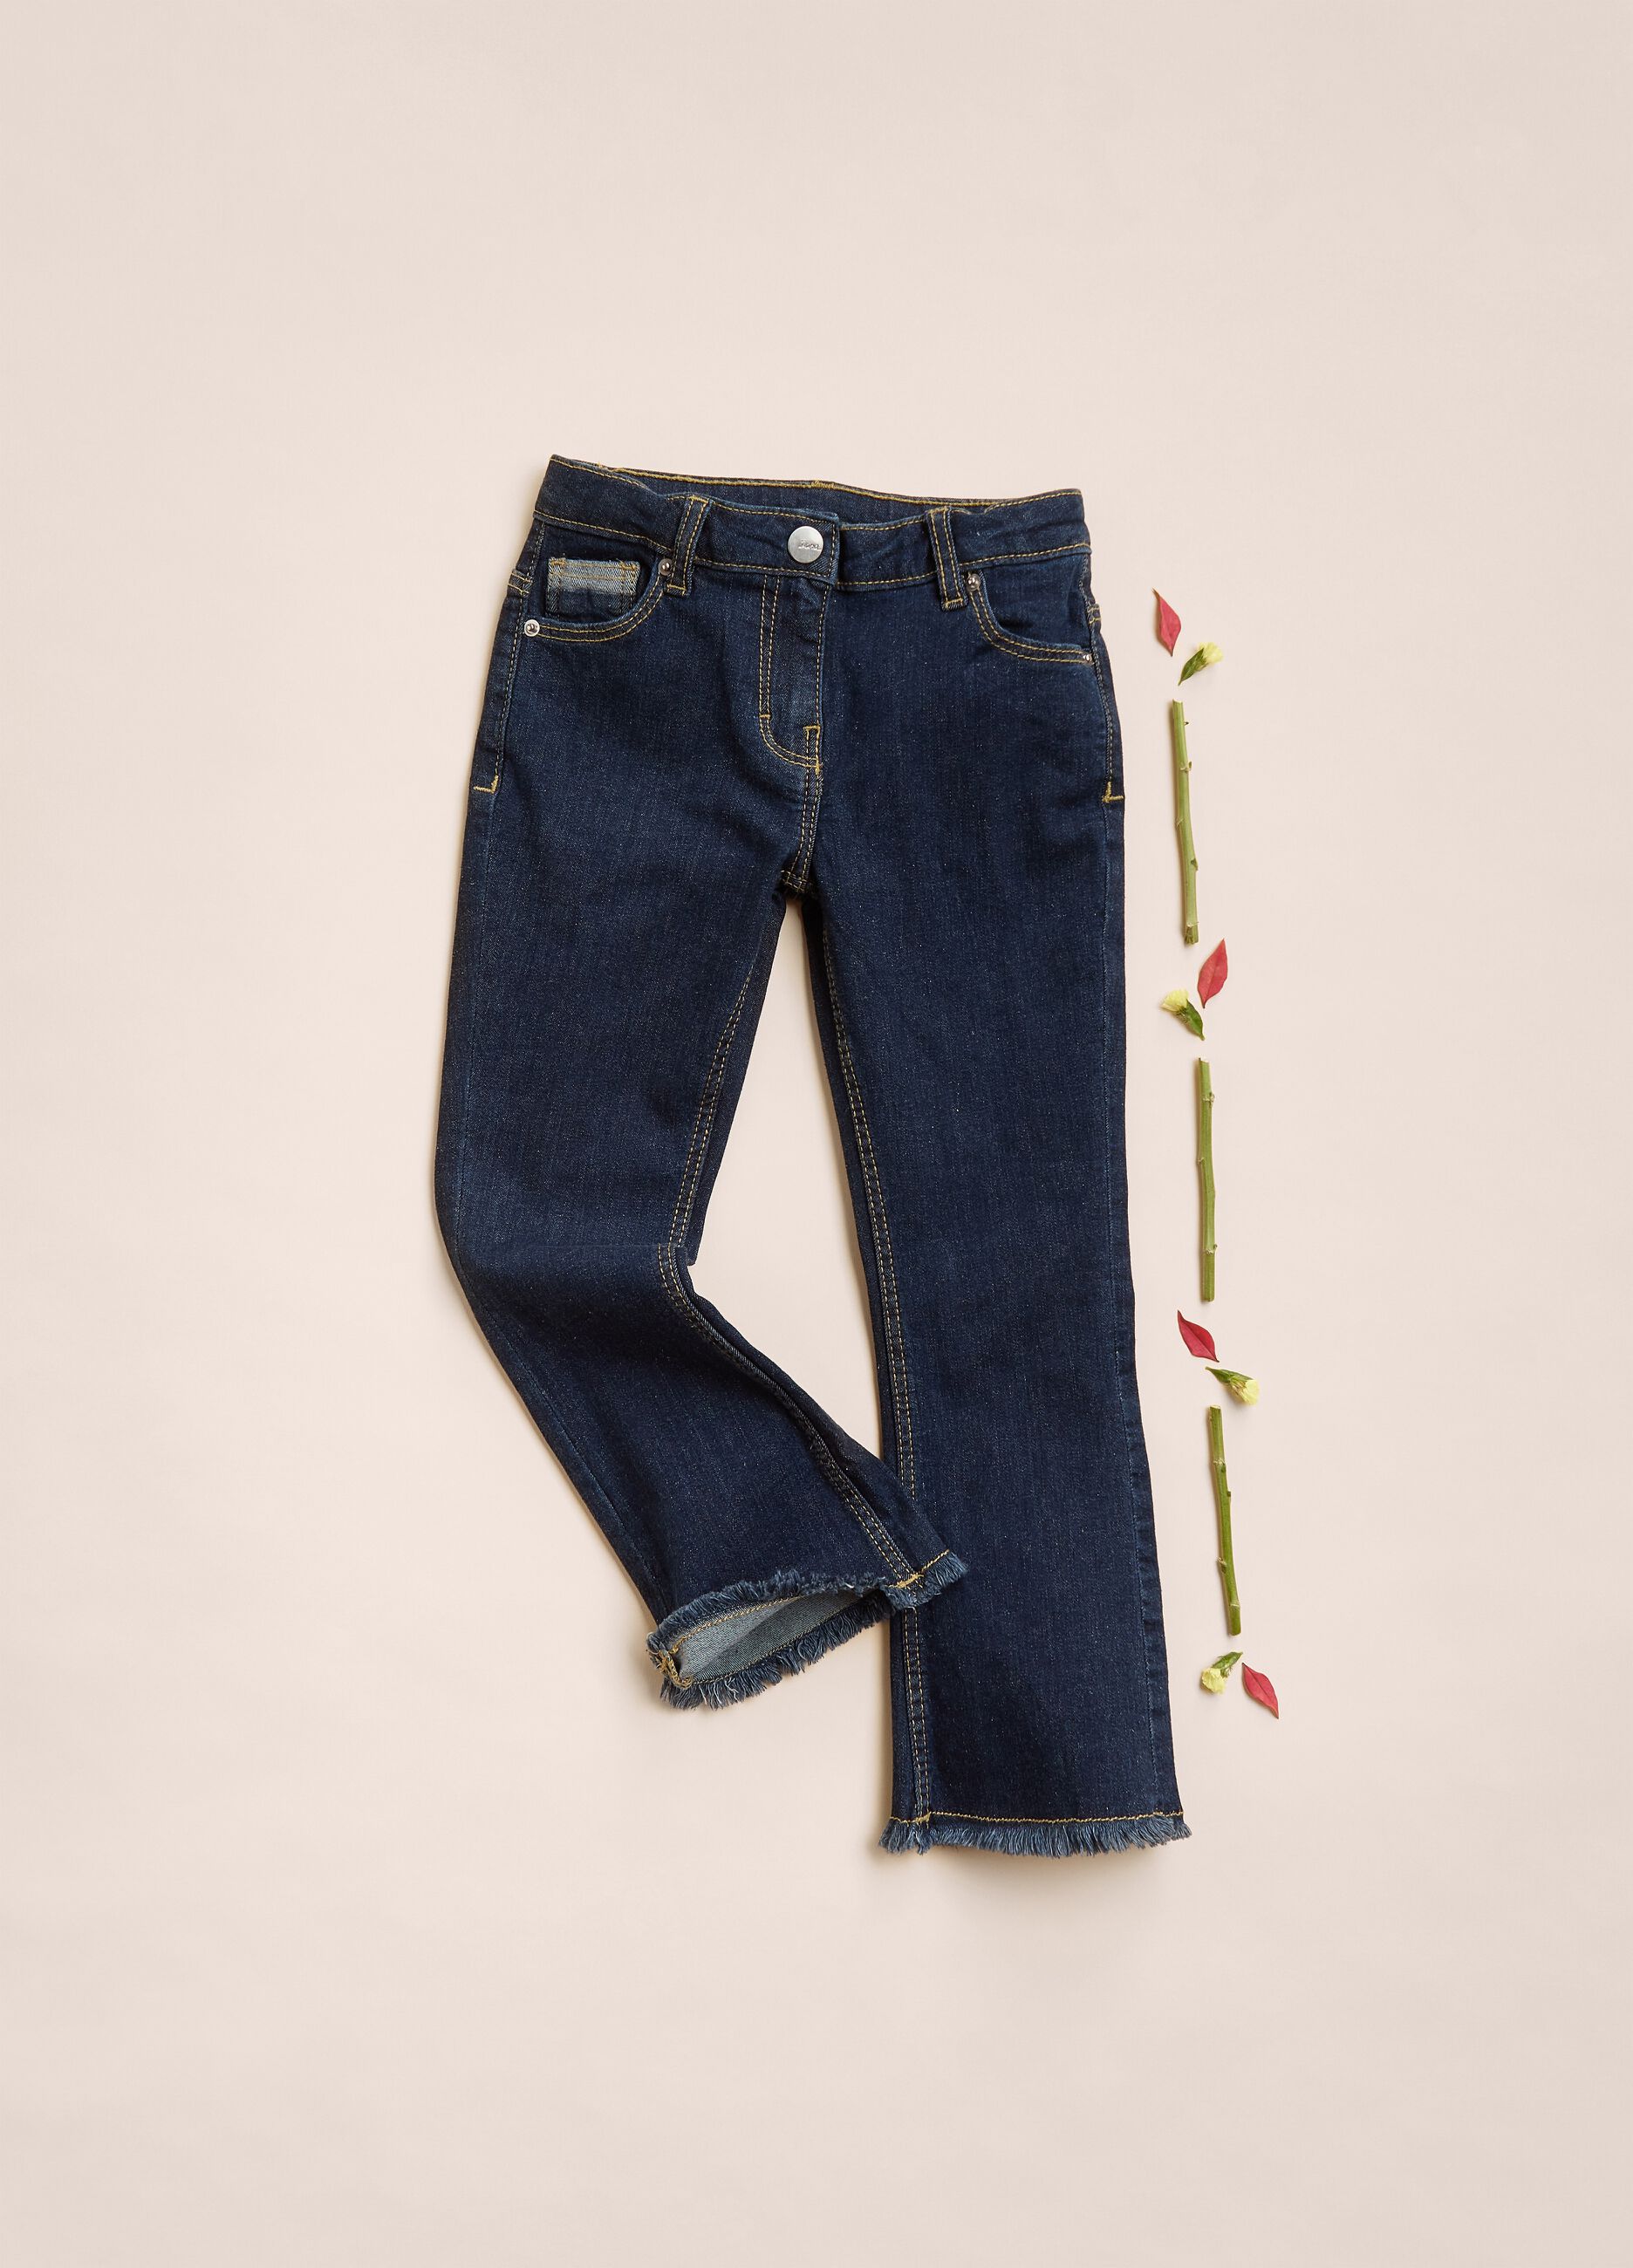 IANA jeans in stretch cotton